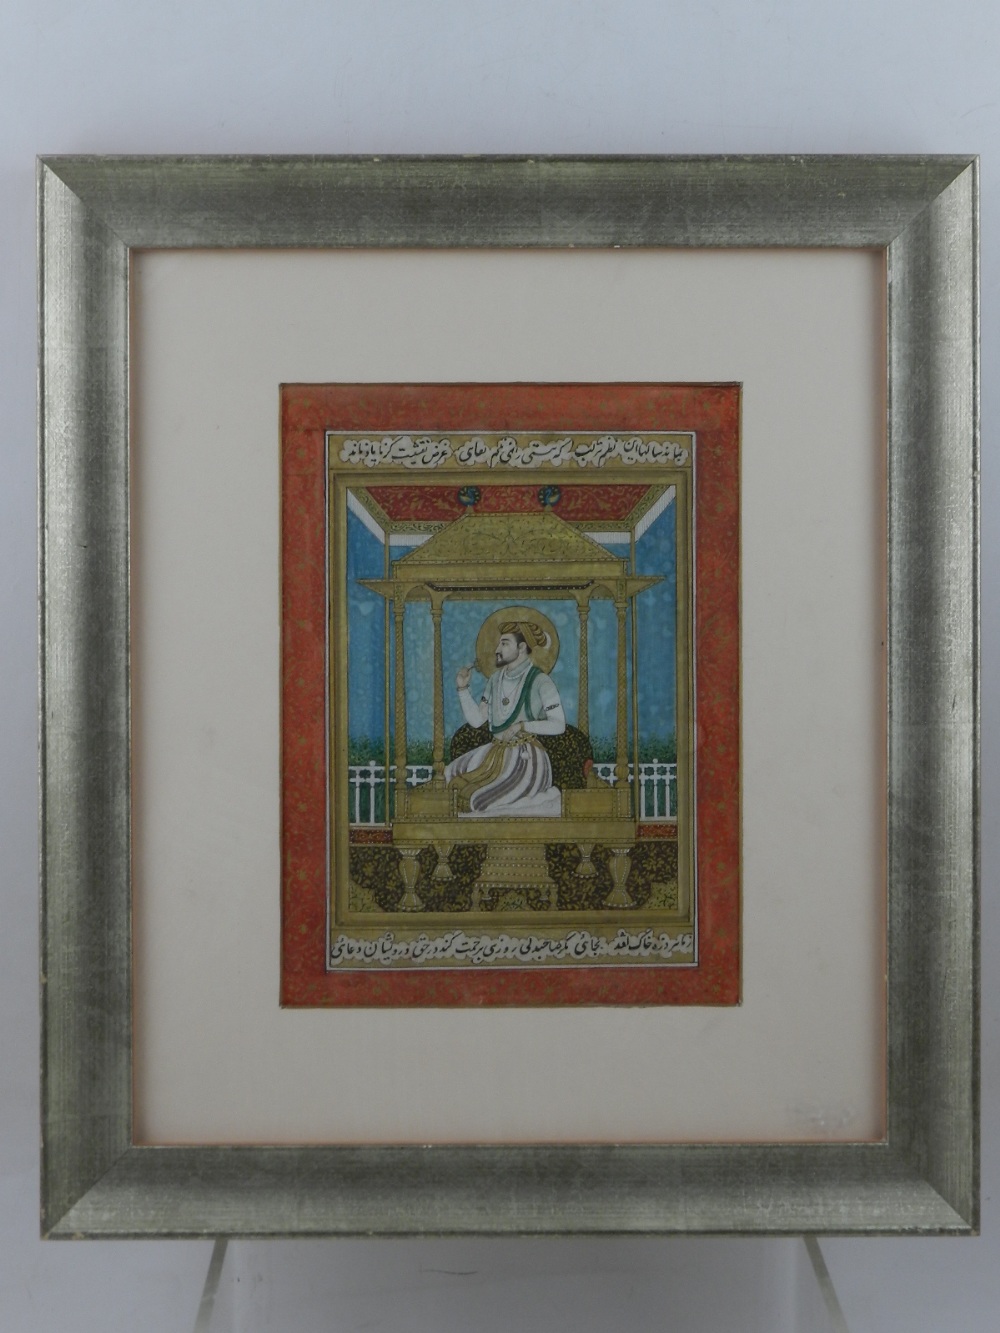 A late 19th / early 20th century Mughal style watercolour, depicting seated noblemen in a pergola.